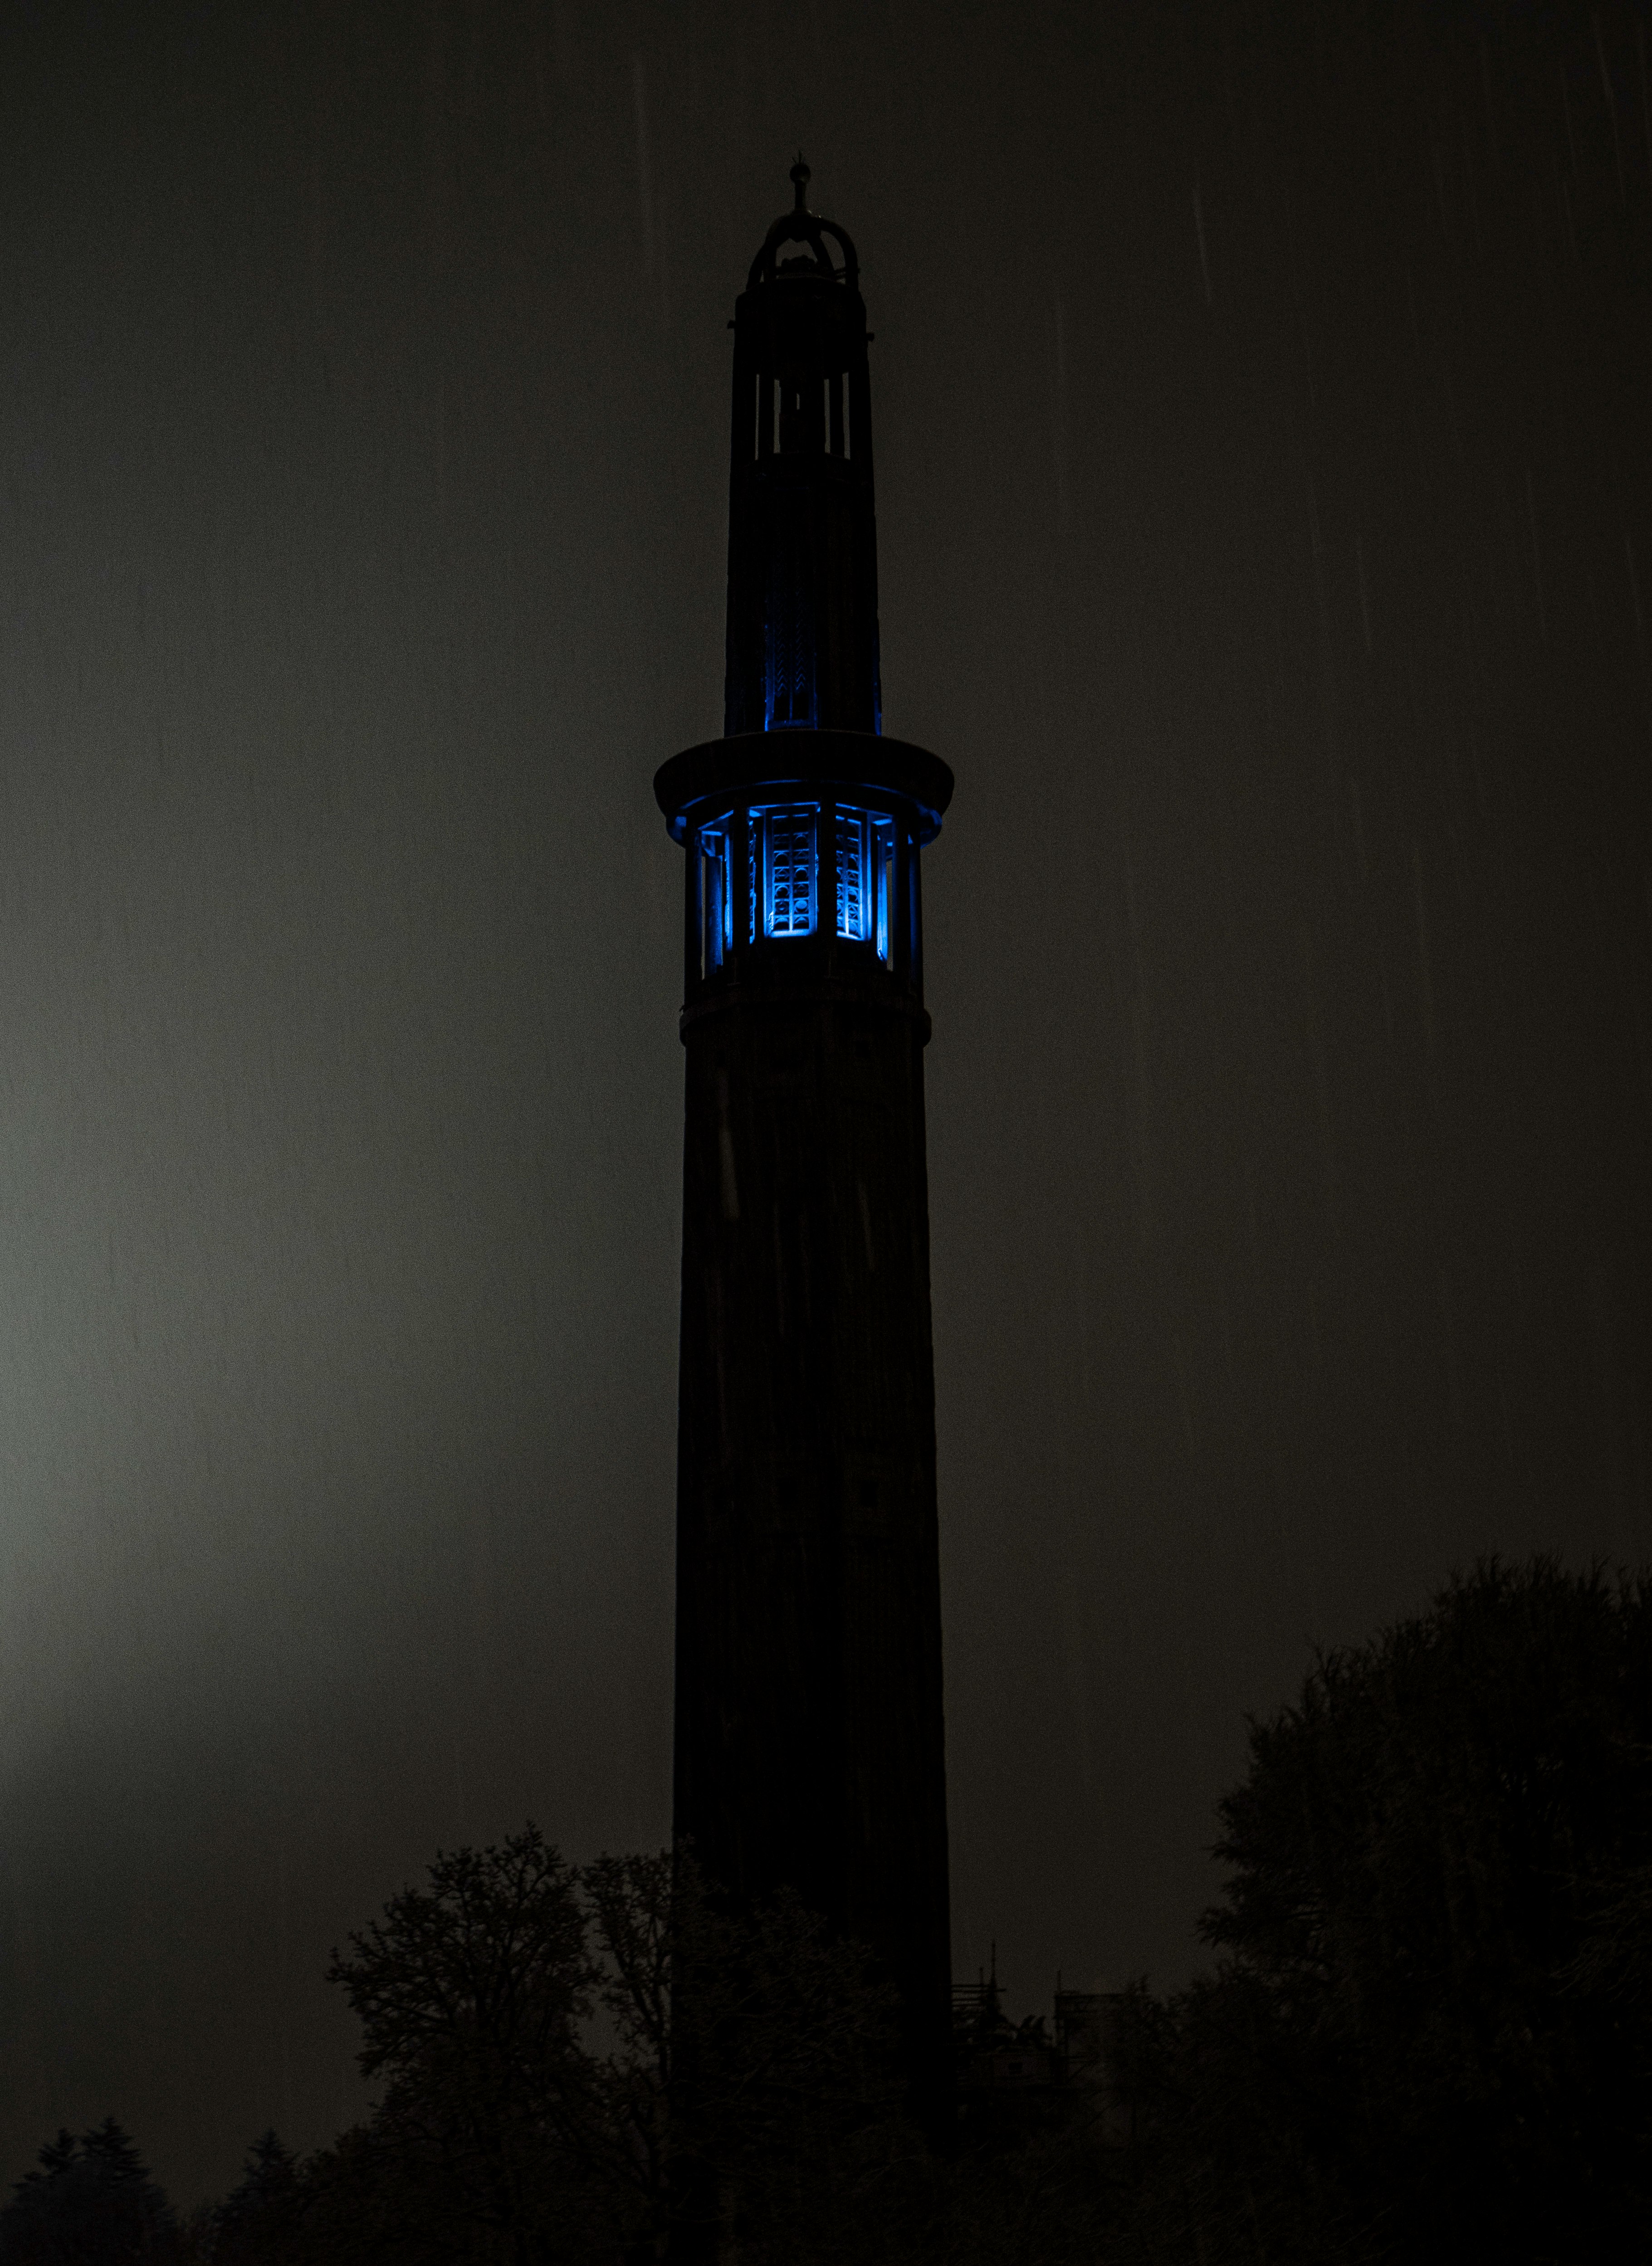 silhouette of tower during night time